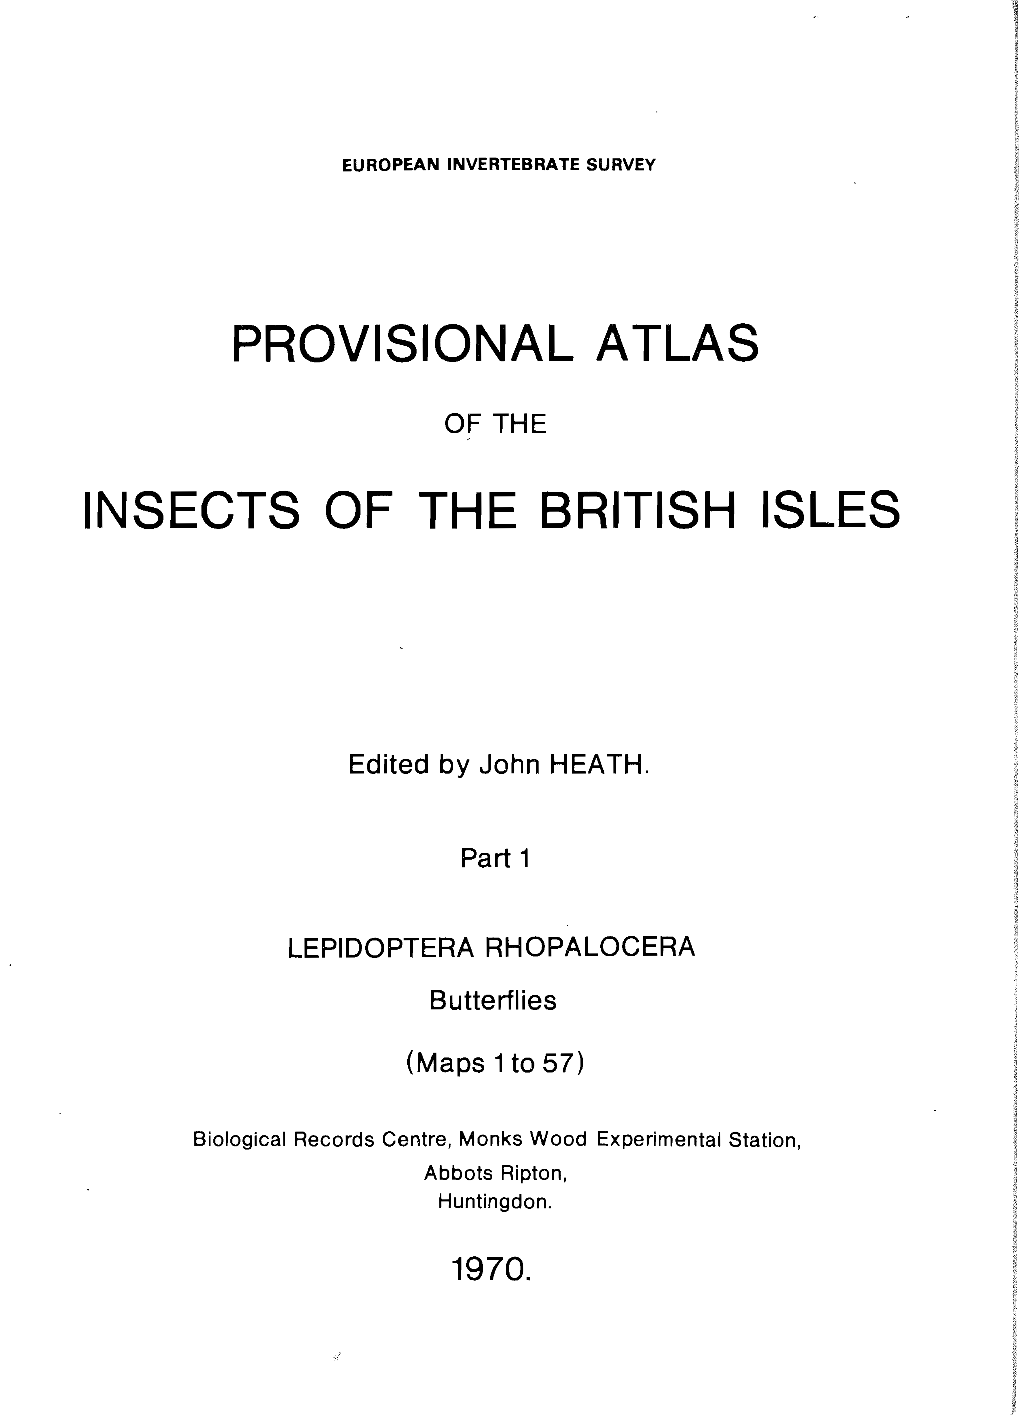 Provisional Atlas Insects of the British Isles